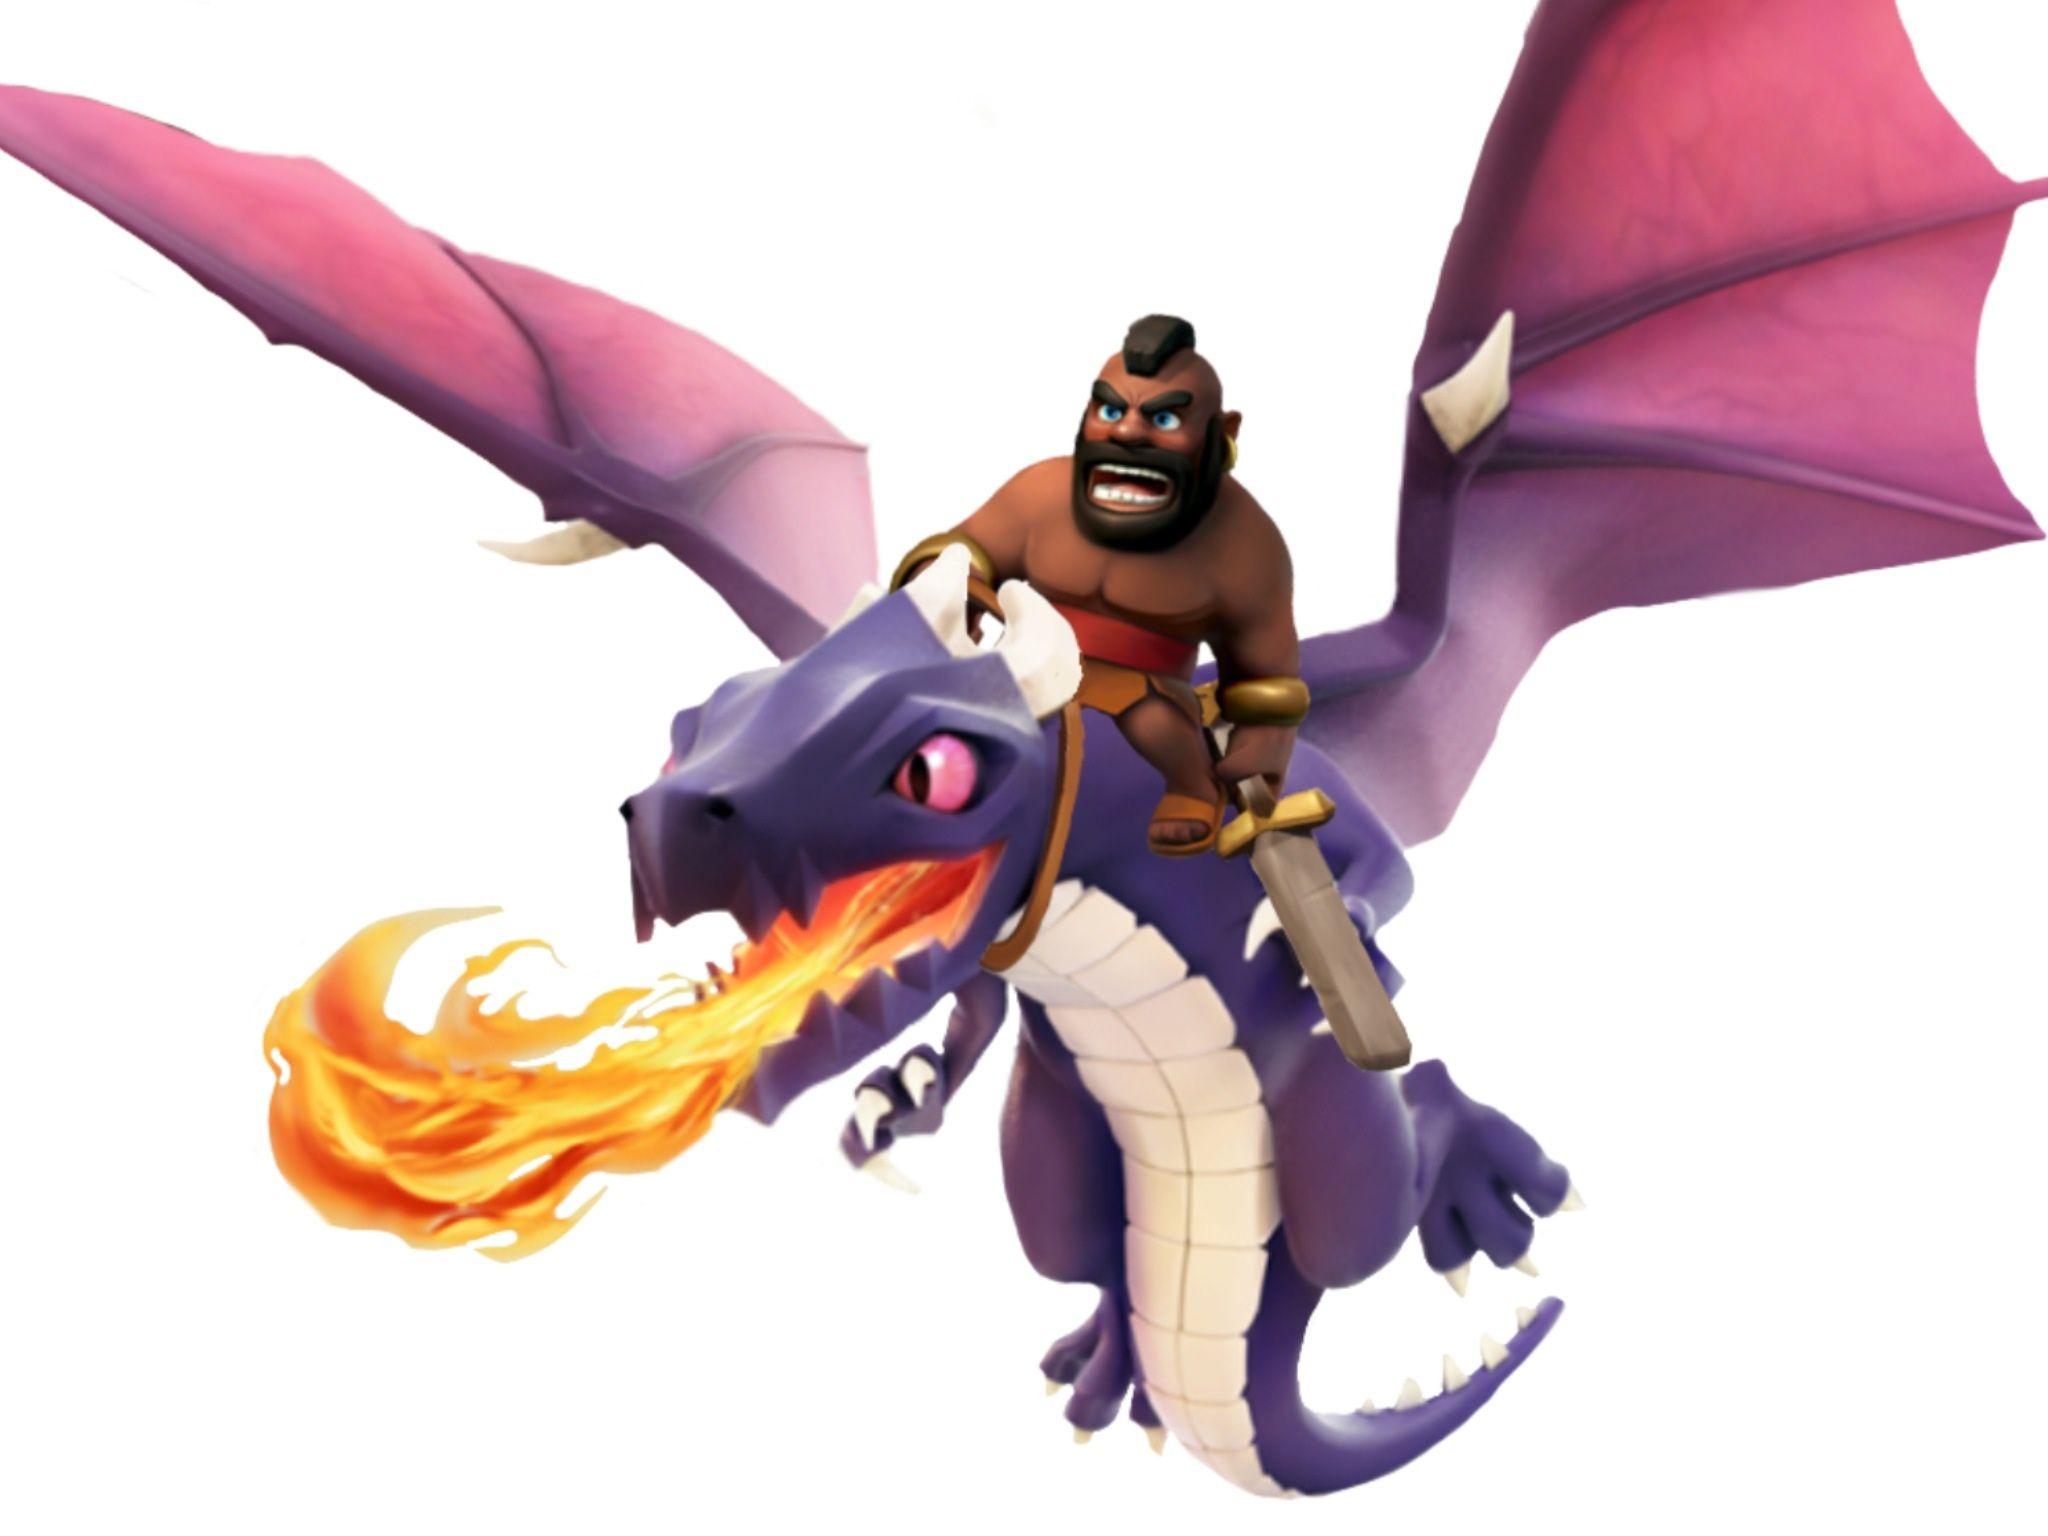 Image for Clash of Clans Hog Rider Dragon 19 Free HD Wallpaper